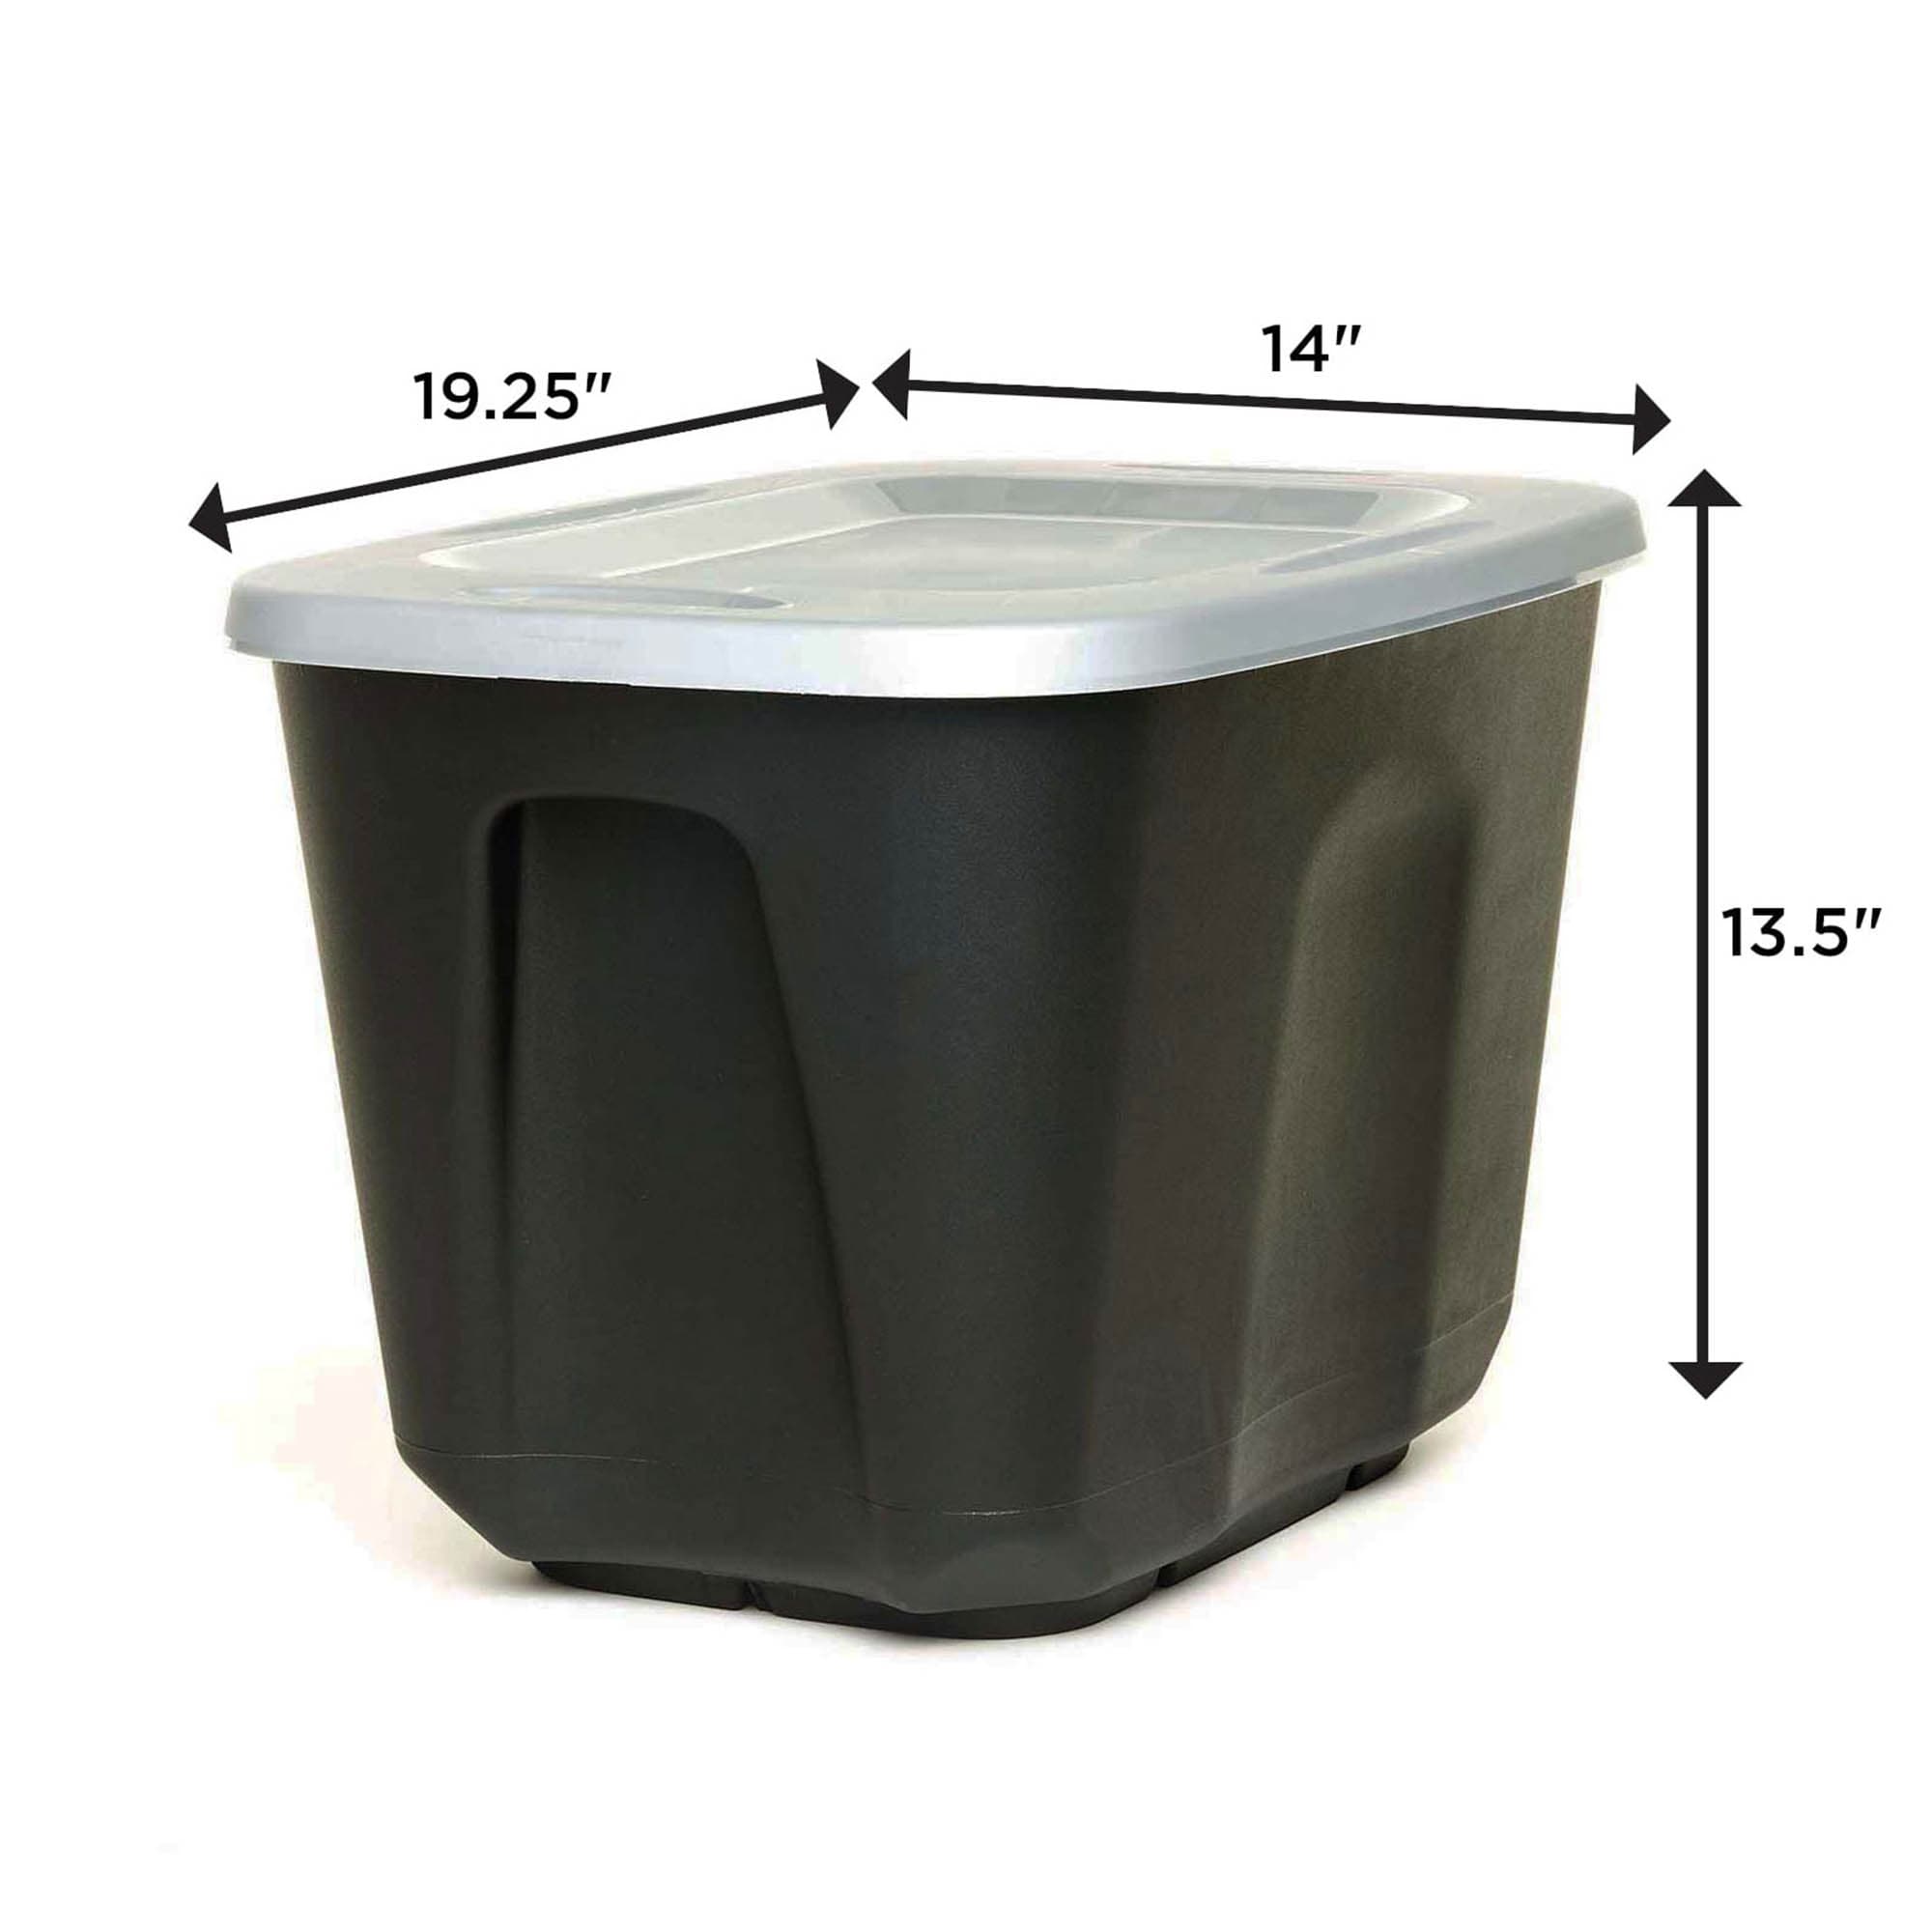 Homz Products Large 10-Gallons (40-Quart) Black Standard with Lid at Snap Tote